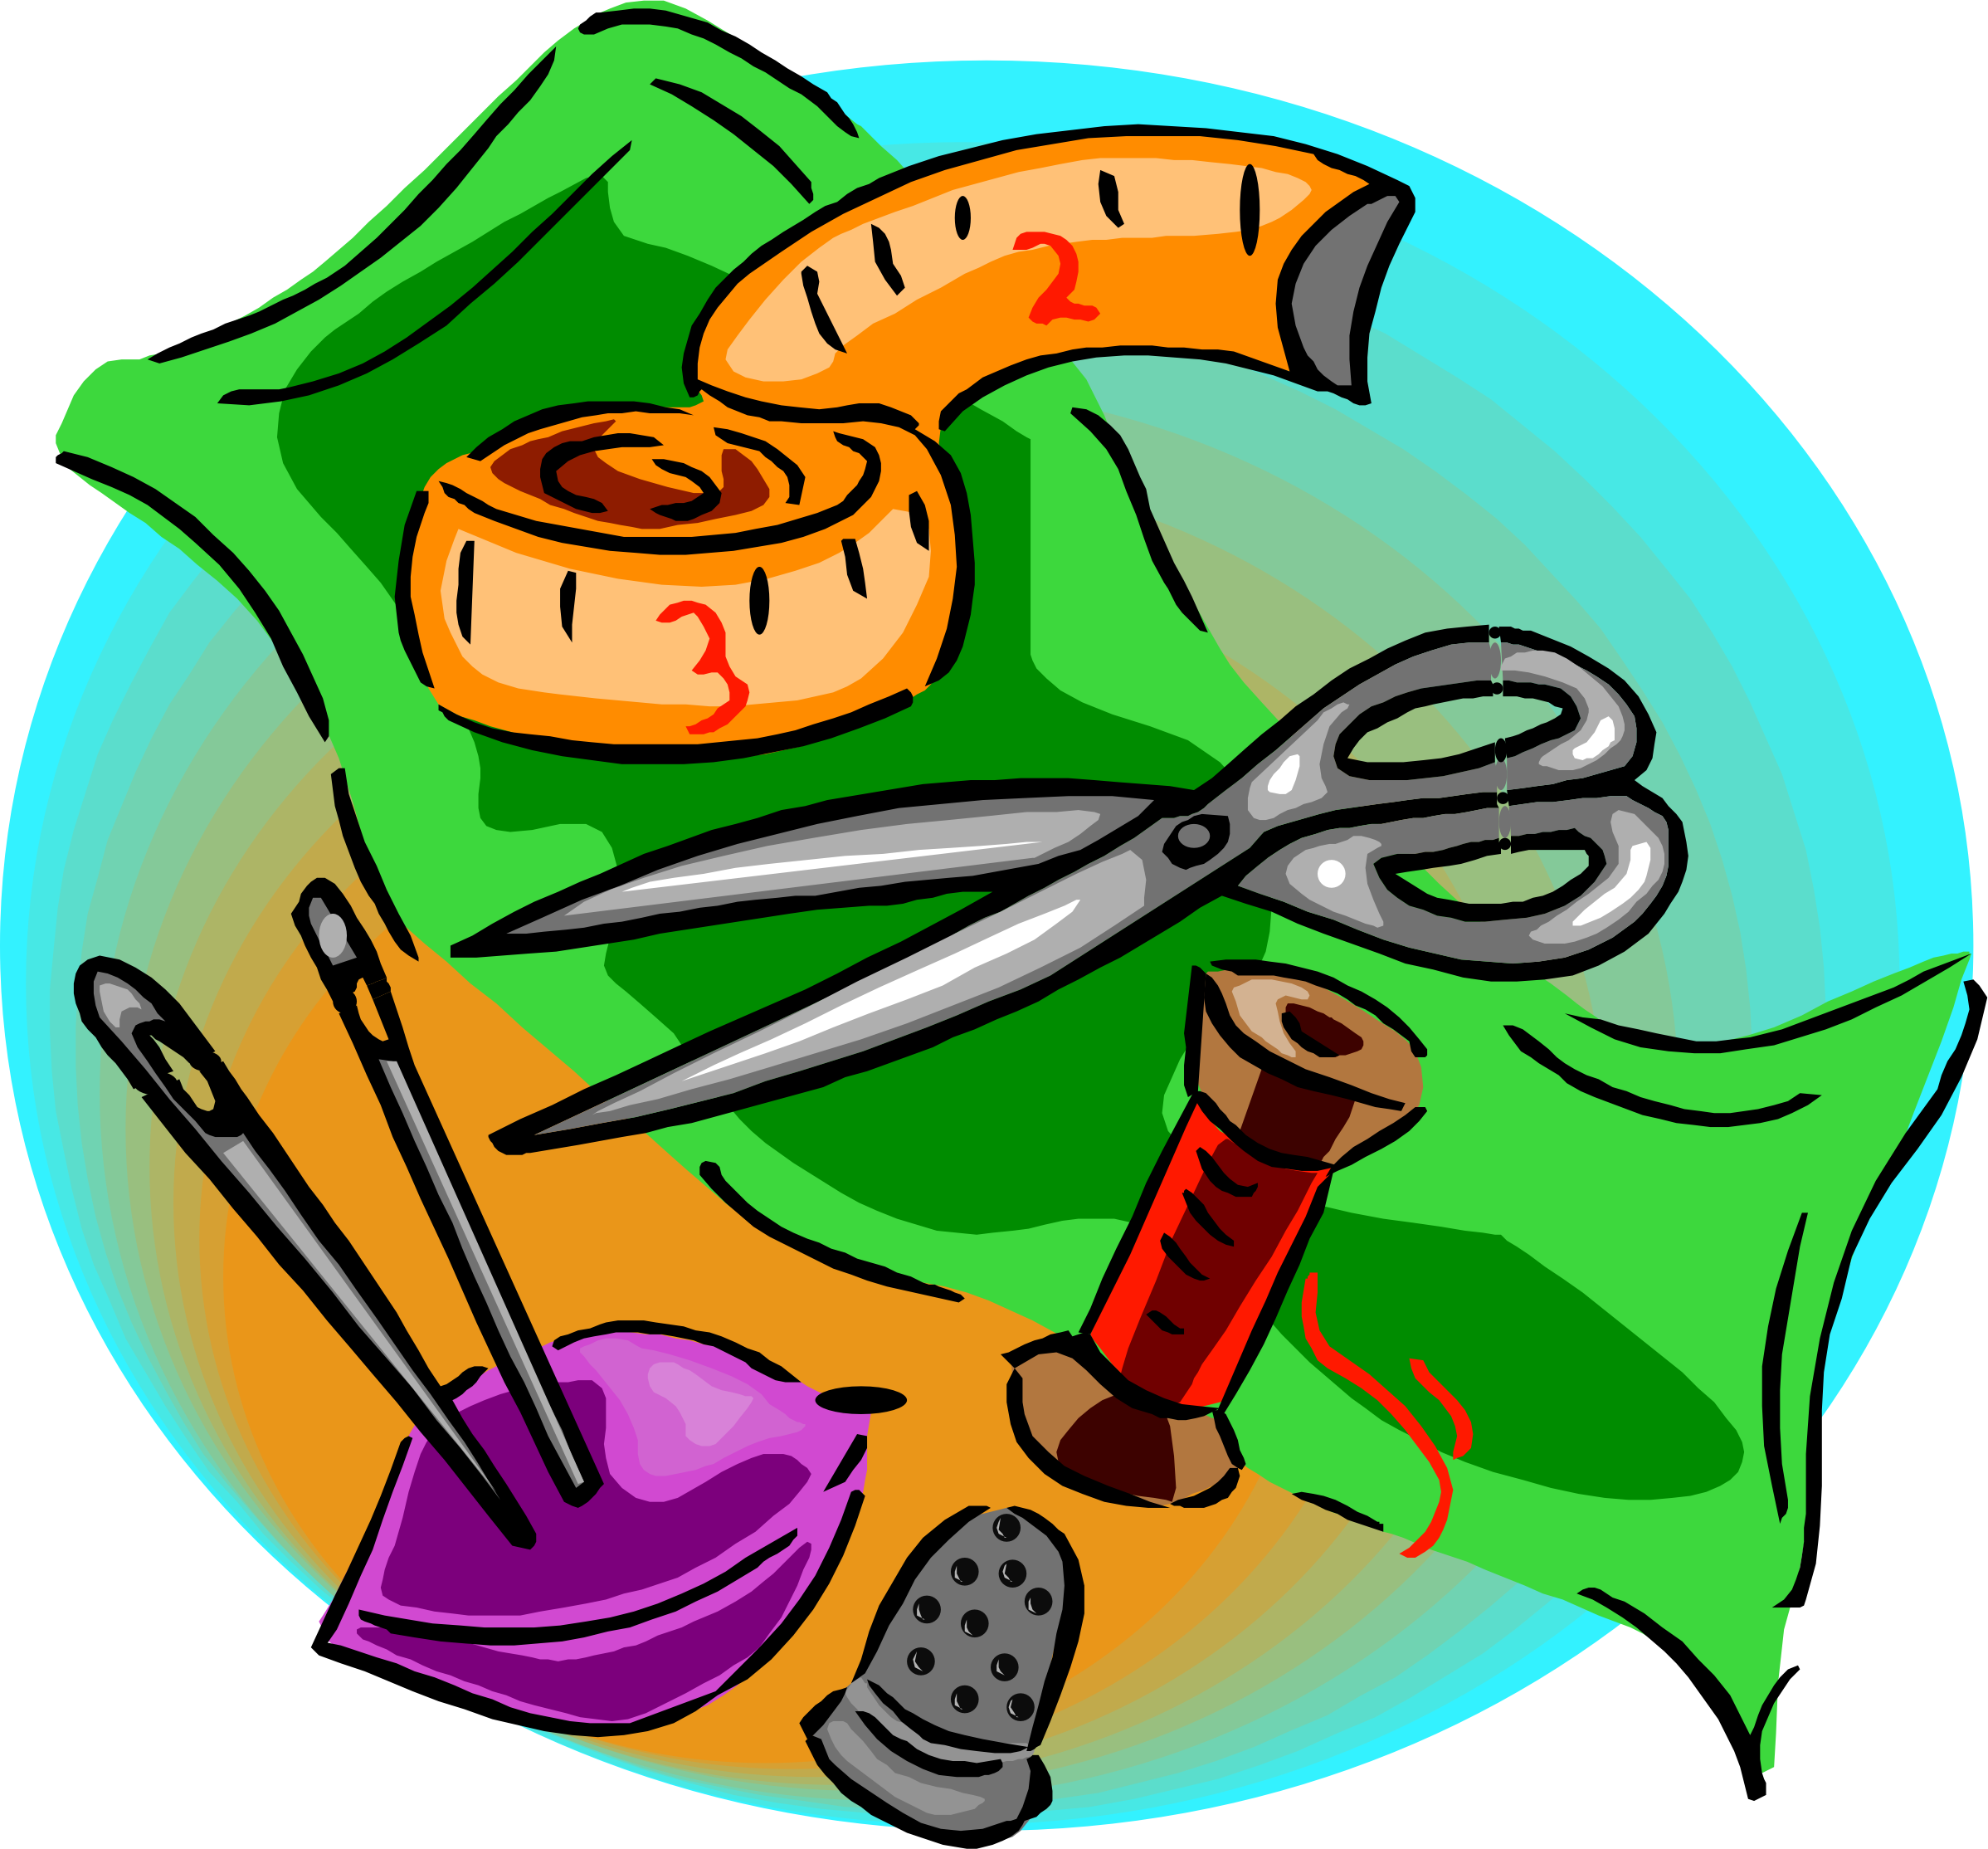 Sewing Tools - Sewing Tools And Equipment Clipart (2396x2228)